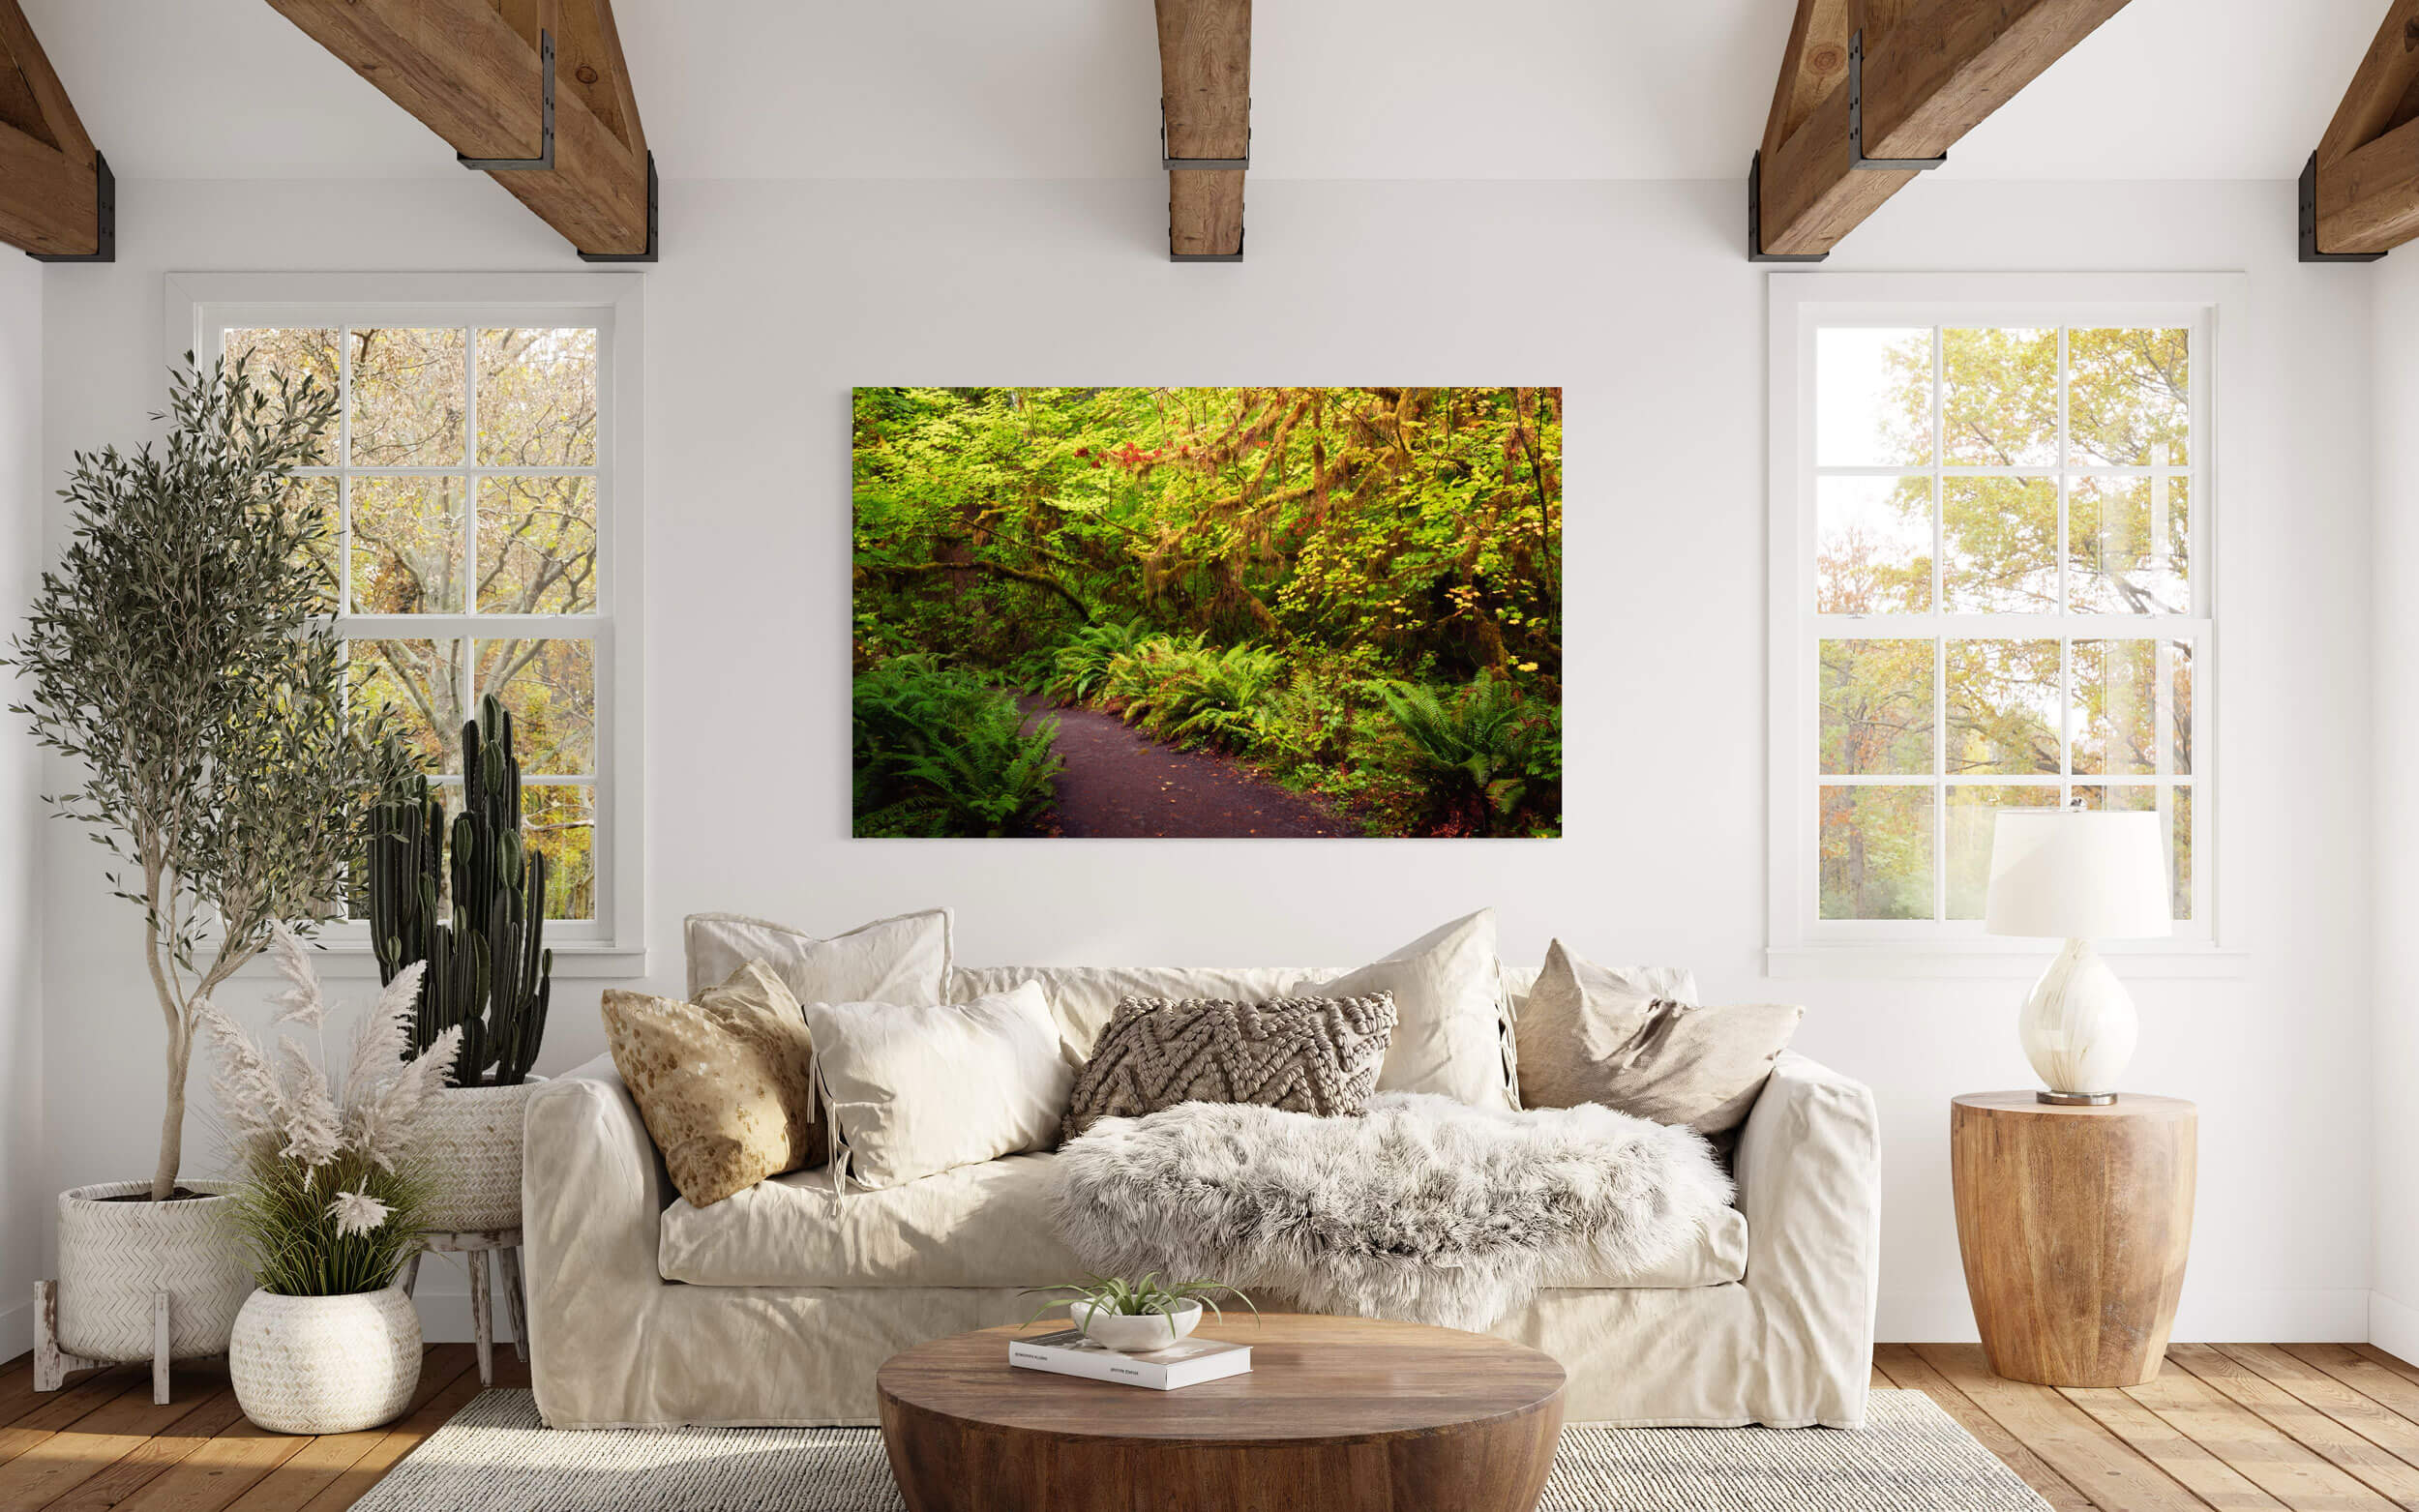 A Hoh Rainforest picture taken on an Olympic National Park hike hangs in a living room.